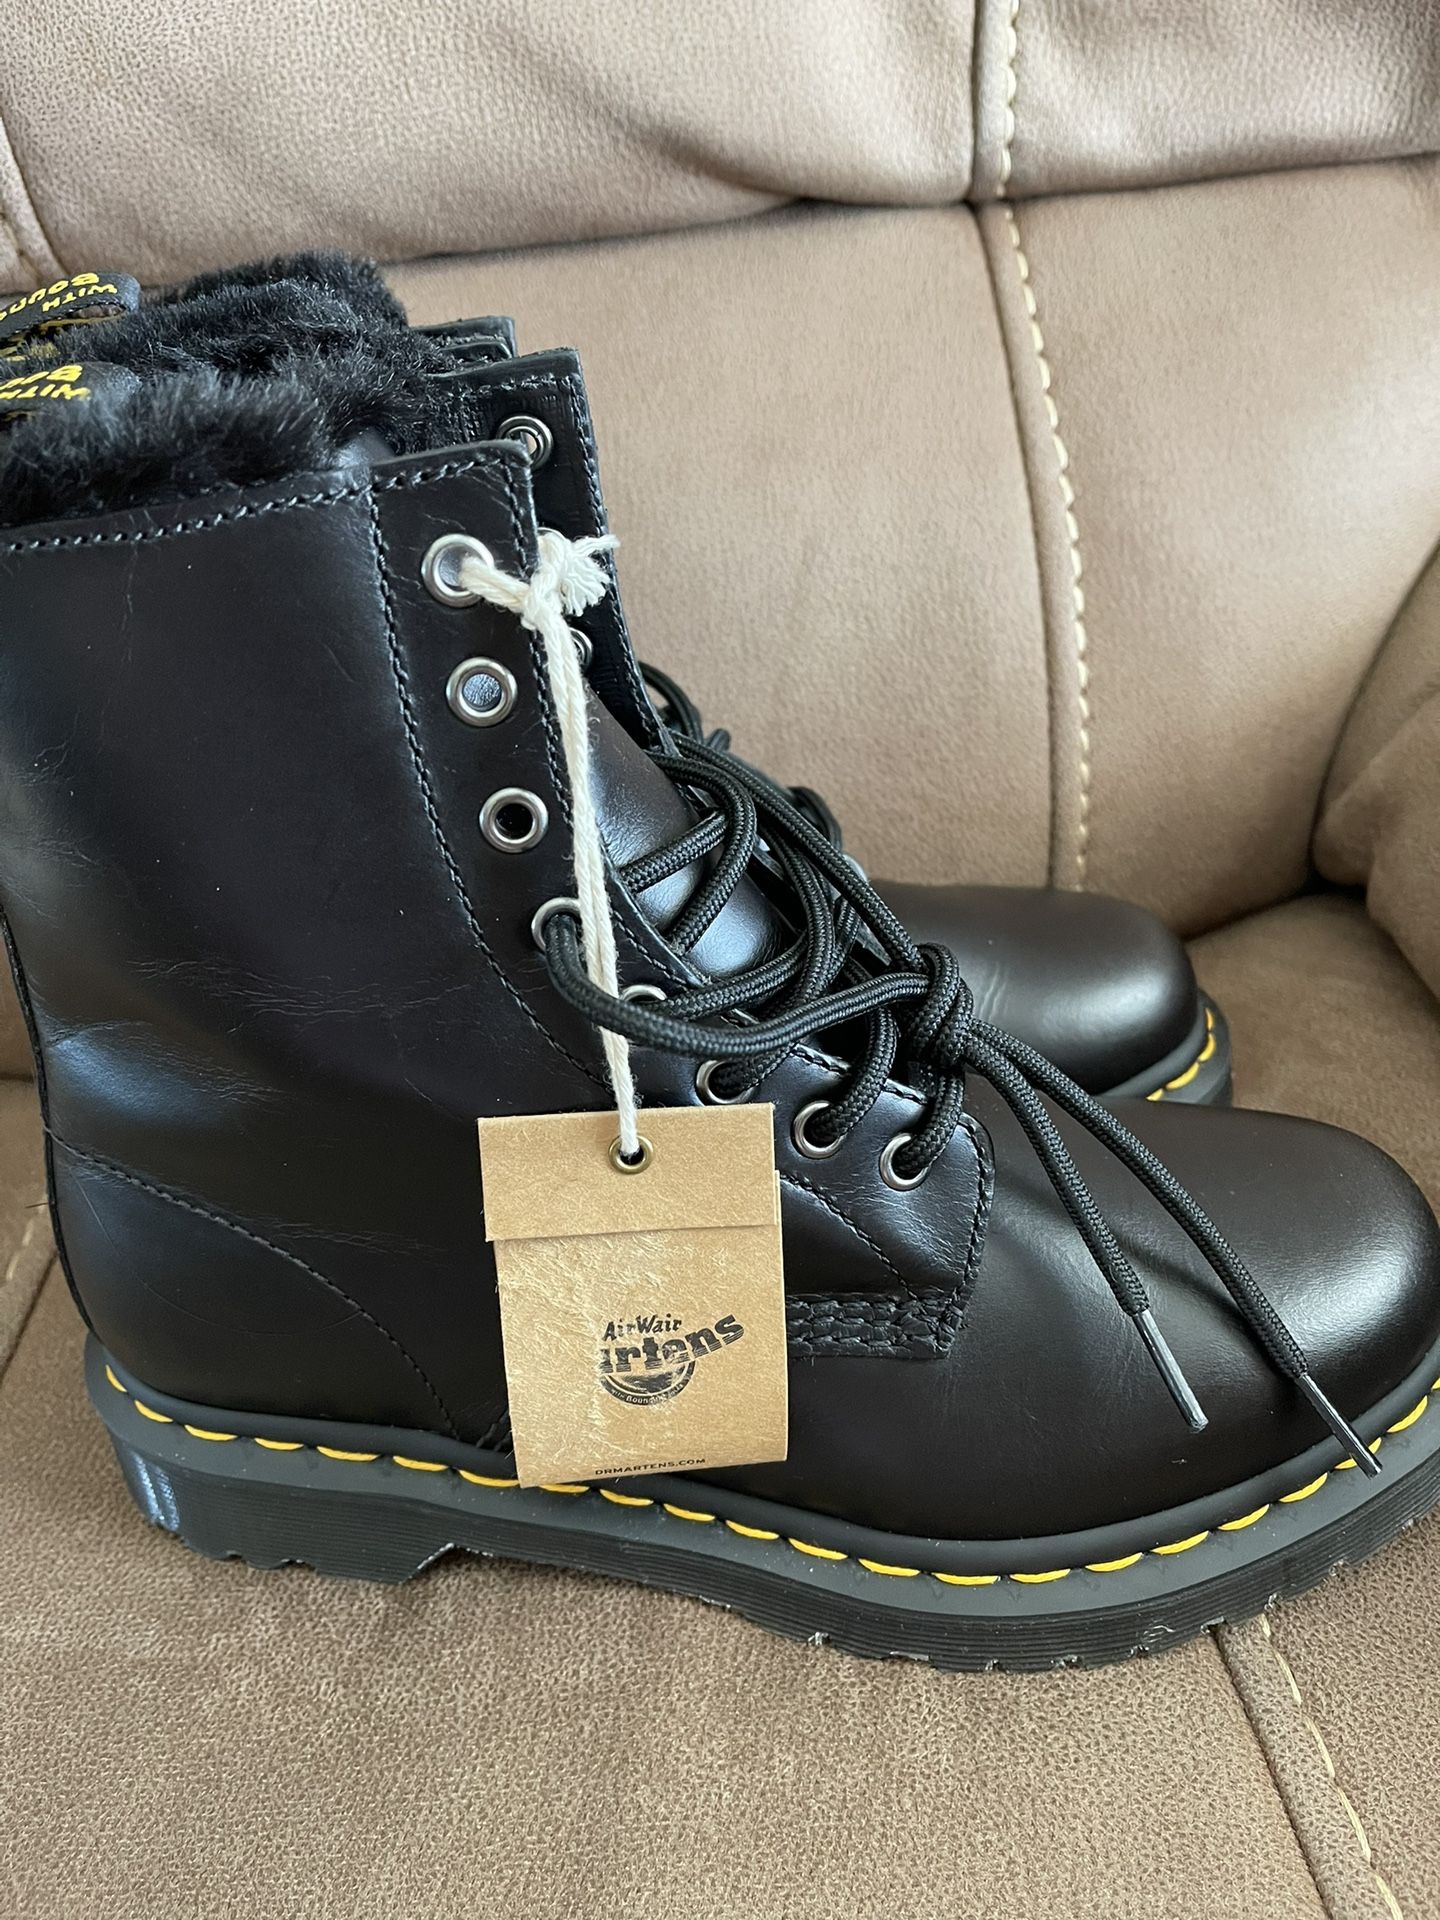 Dr Marten’s Boots With Fur Size 8.